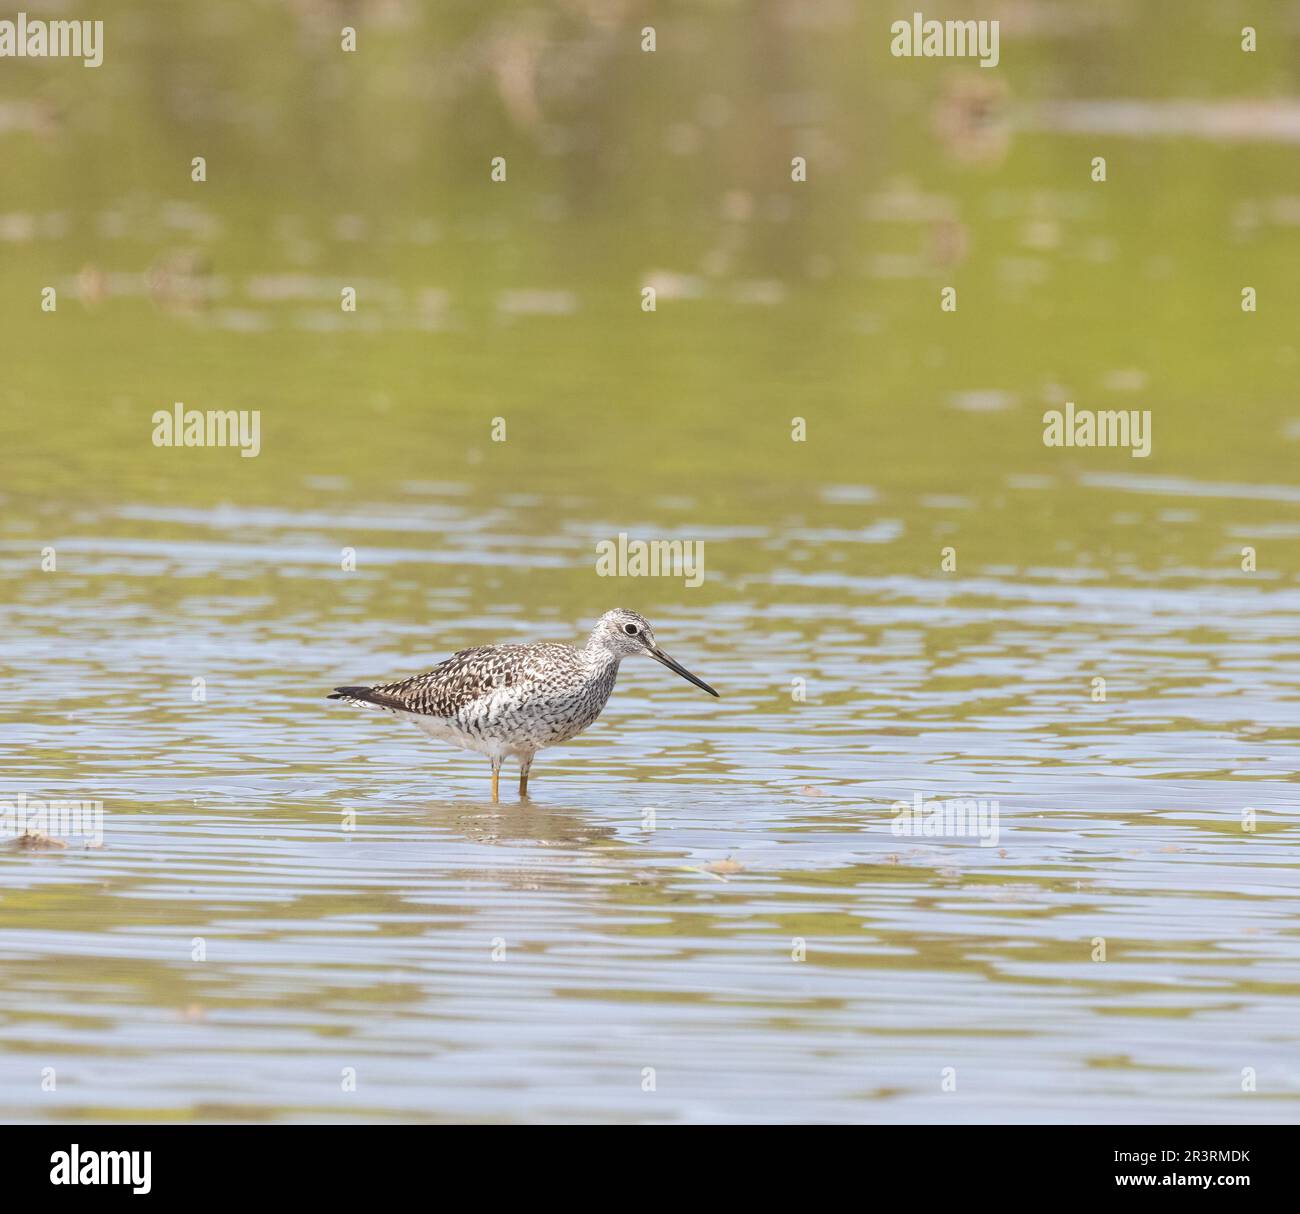 A Greater Yellowlegs sandpiper wading in water in evening light Stock Photo